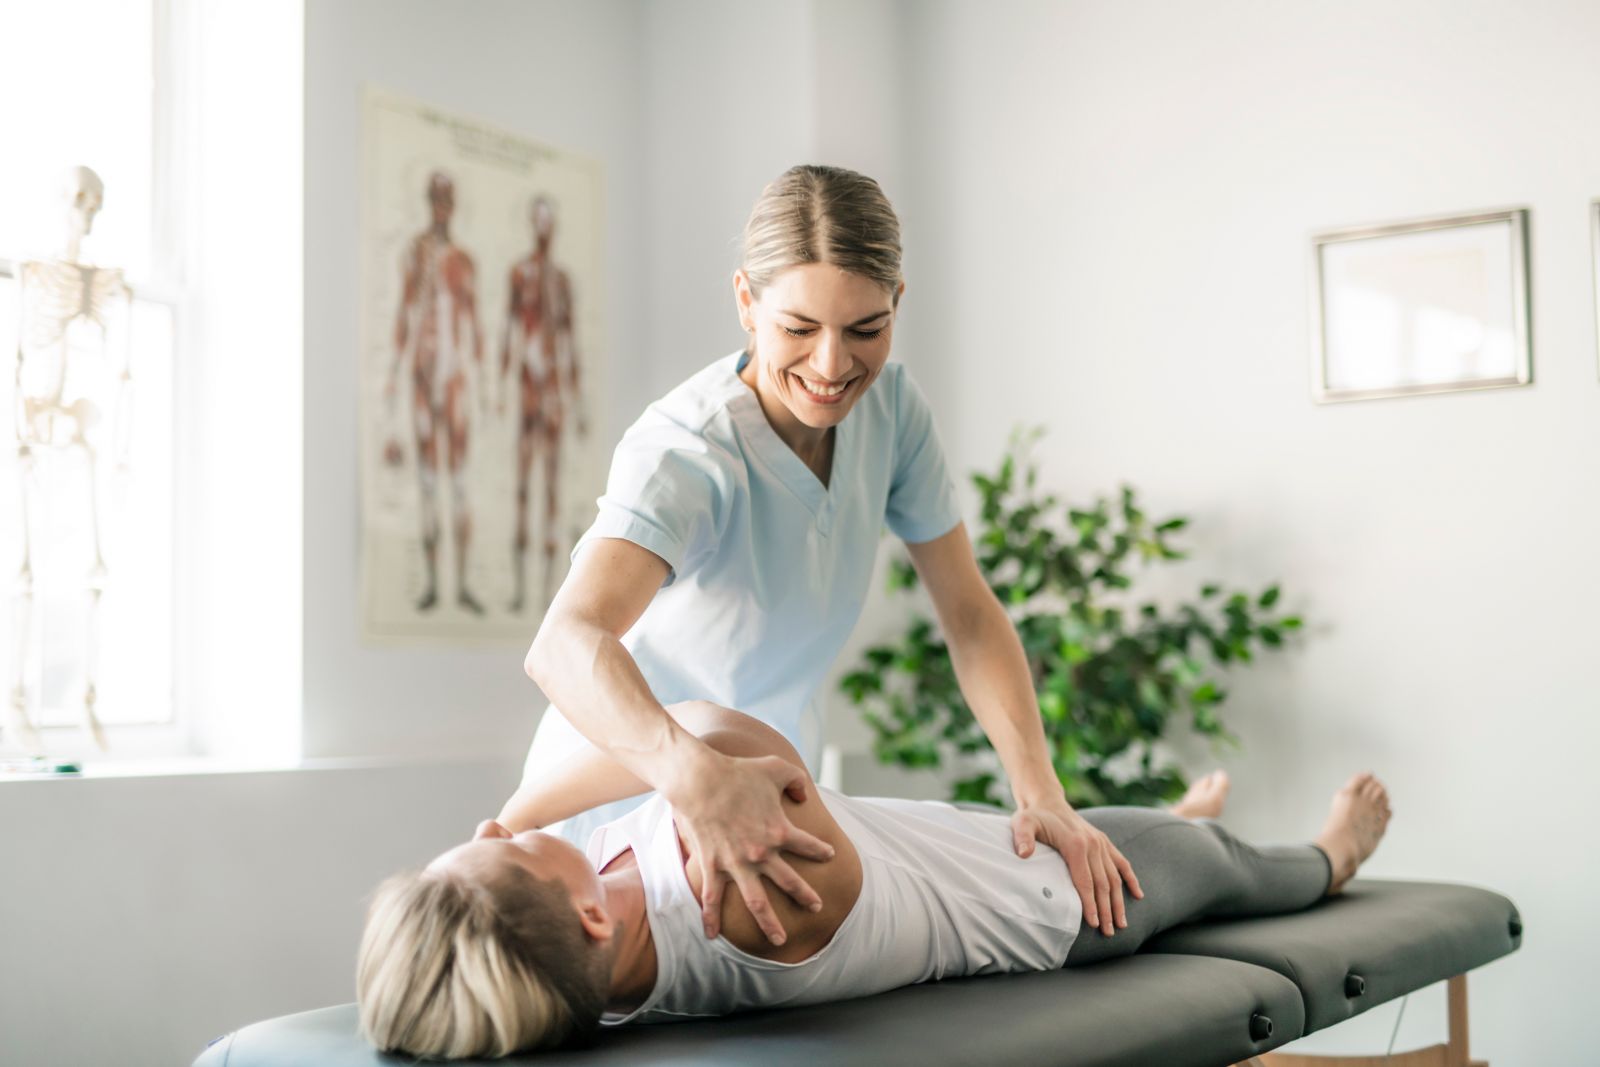 Physio smiling and helping a patient lying on the treatment bed - HCi extras helps with physio costs » HCi